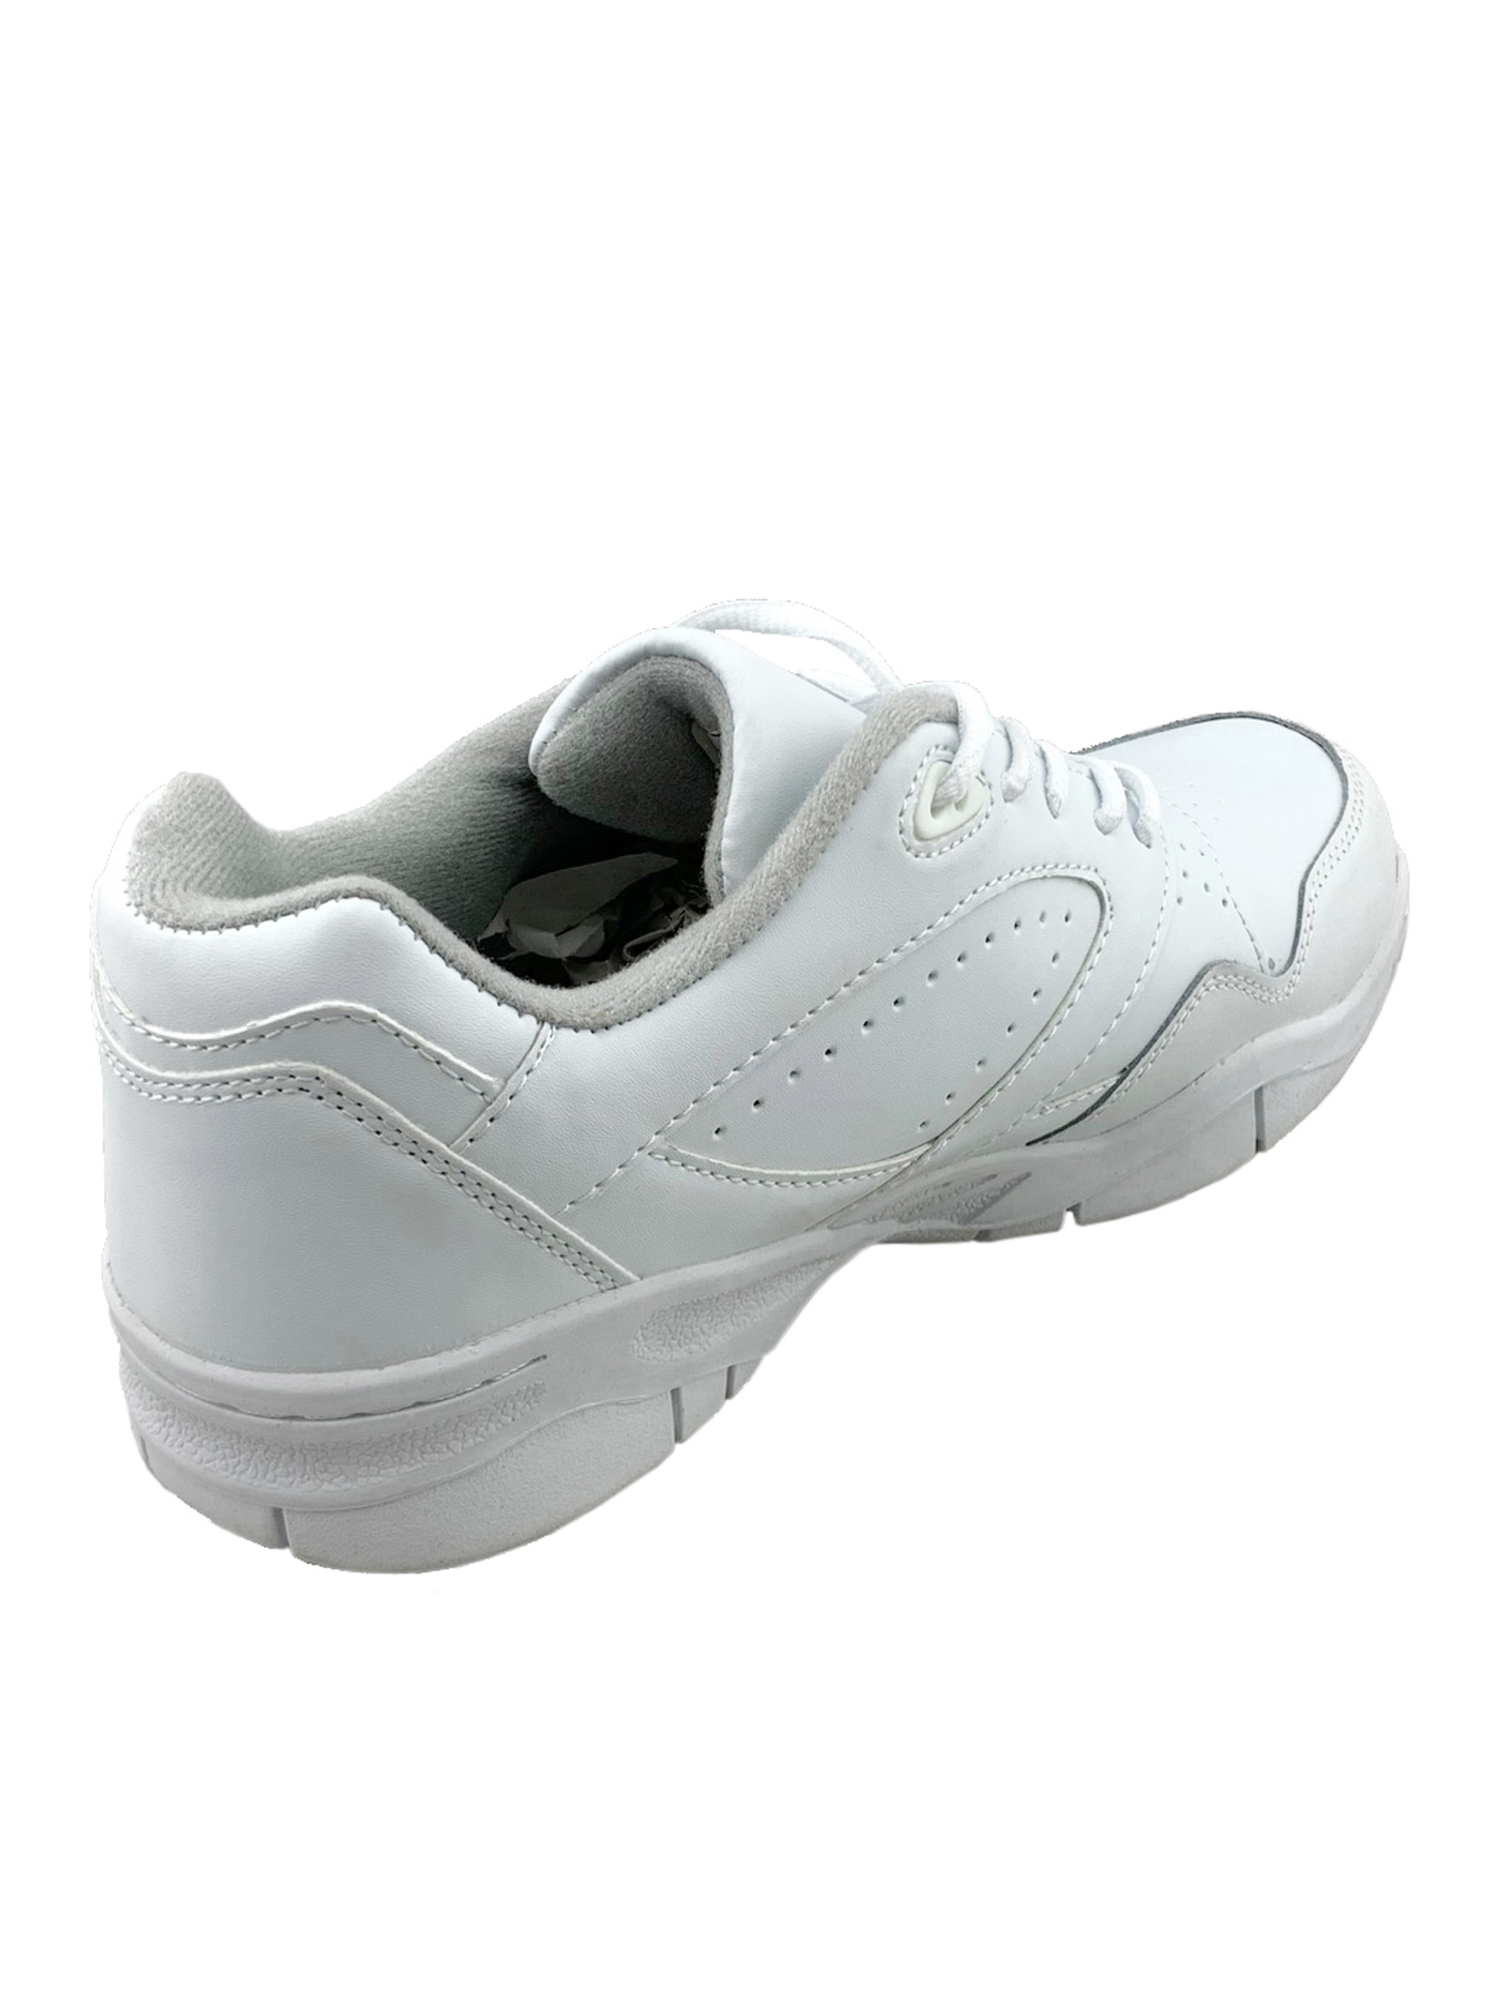 Tanleewa Men's Leather White Sports Shoes Lightweight Sneakers Breathable Casual Shoe Size 3.5 - image 5 of 5